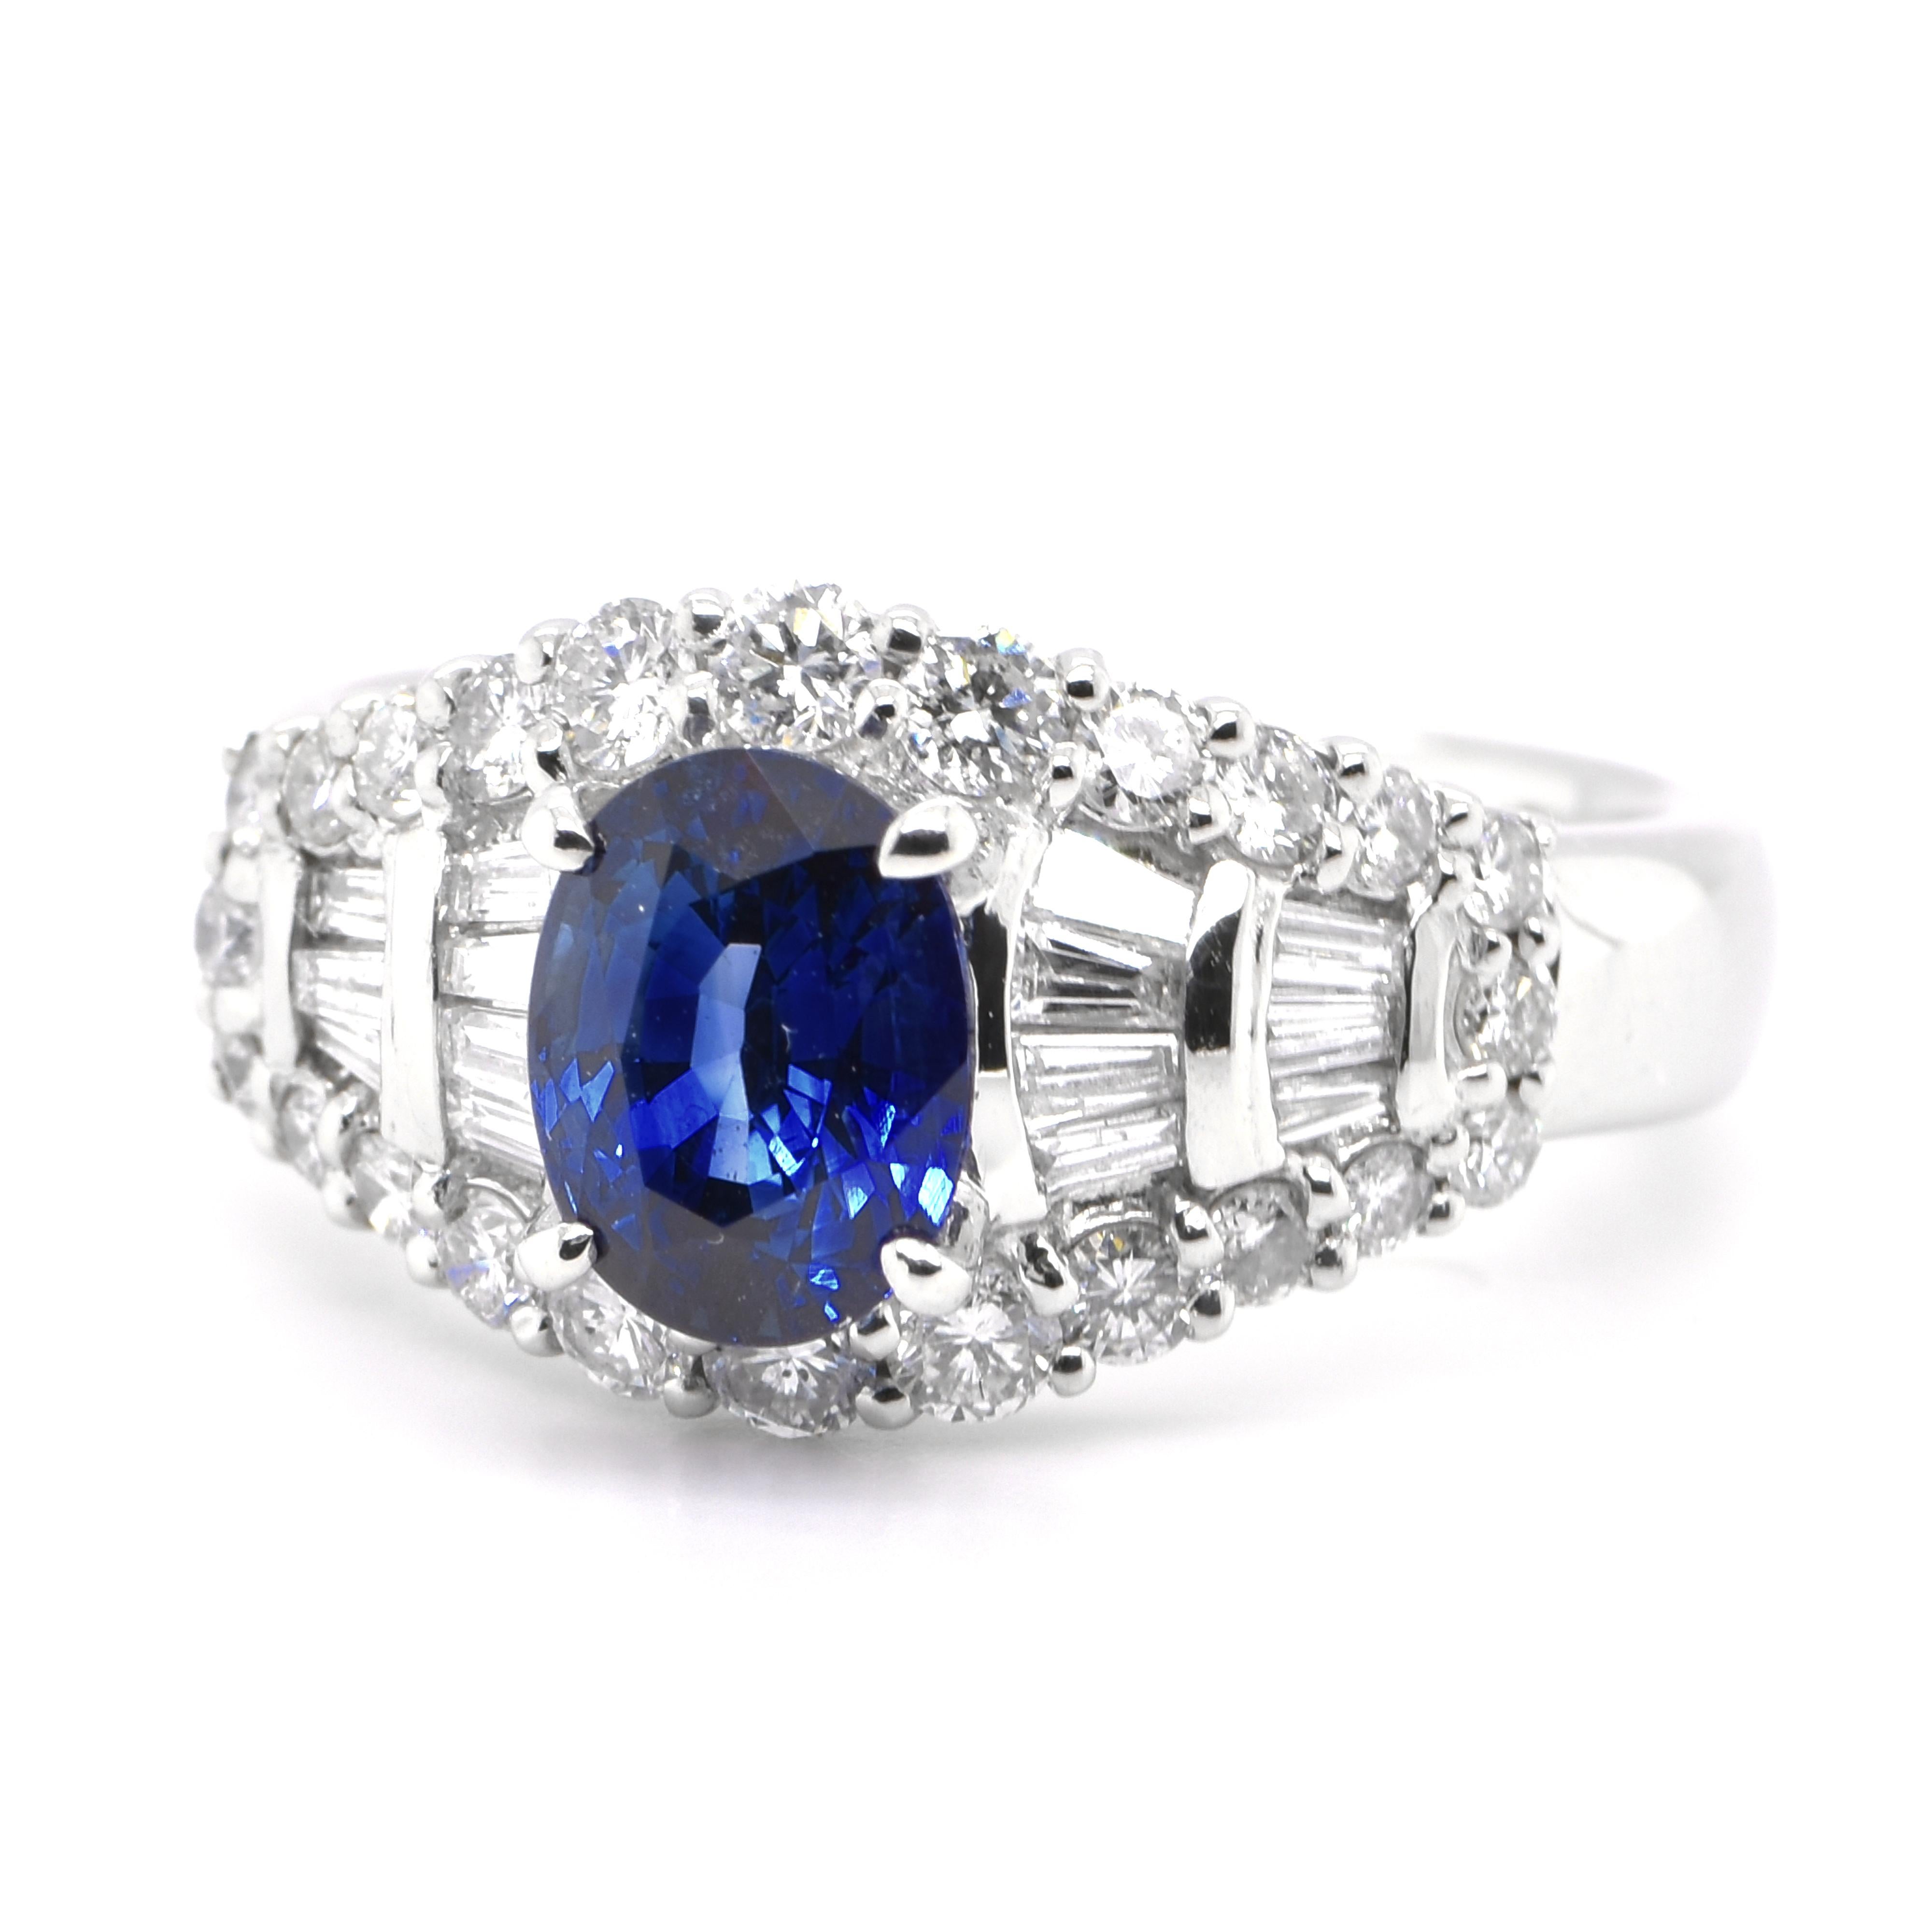 A beautiful Art Deco style ring featuring a 2.02 Carat Natural Blue Sapphire and 0.91 Carats Diamond Accents set in Platinum. Sapphires have extraordinary durability - they excel in hardness as well as toughness and durability making them very